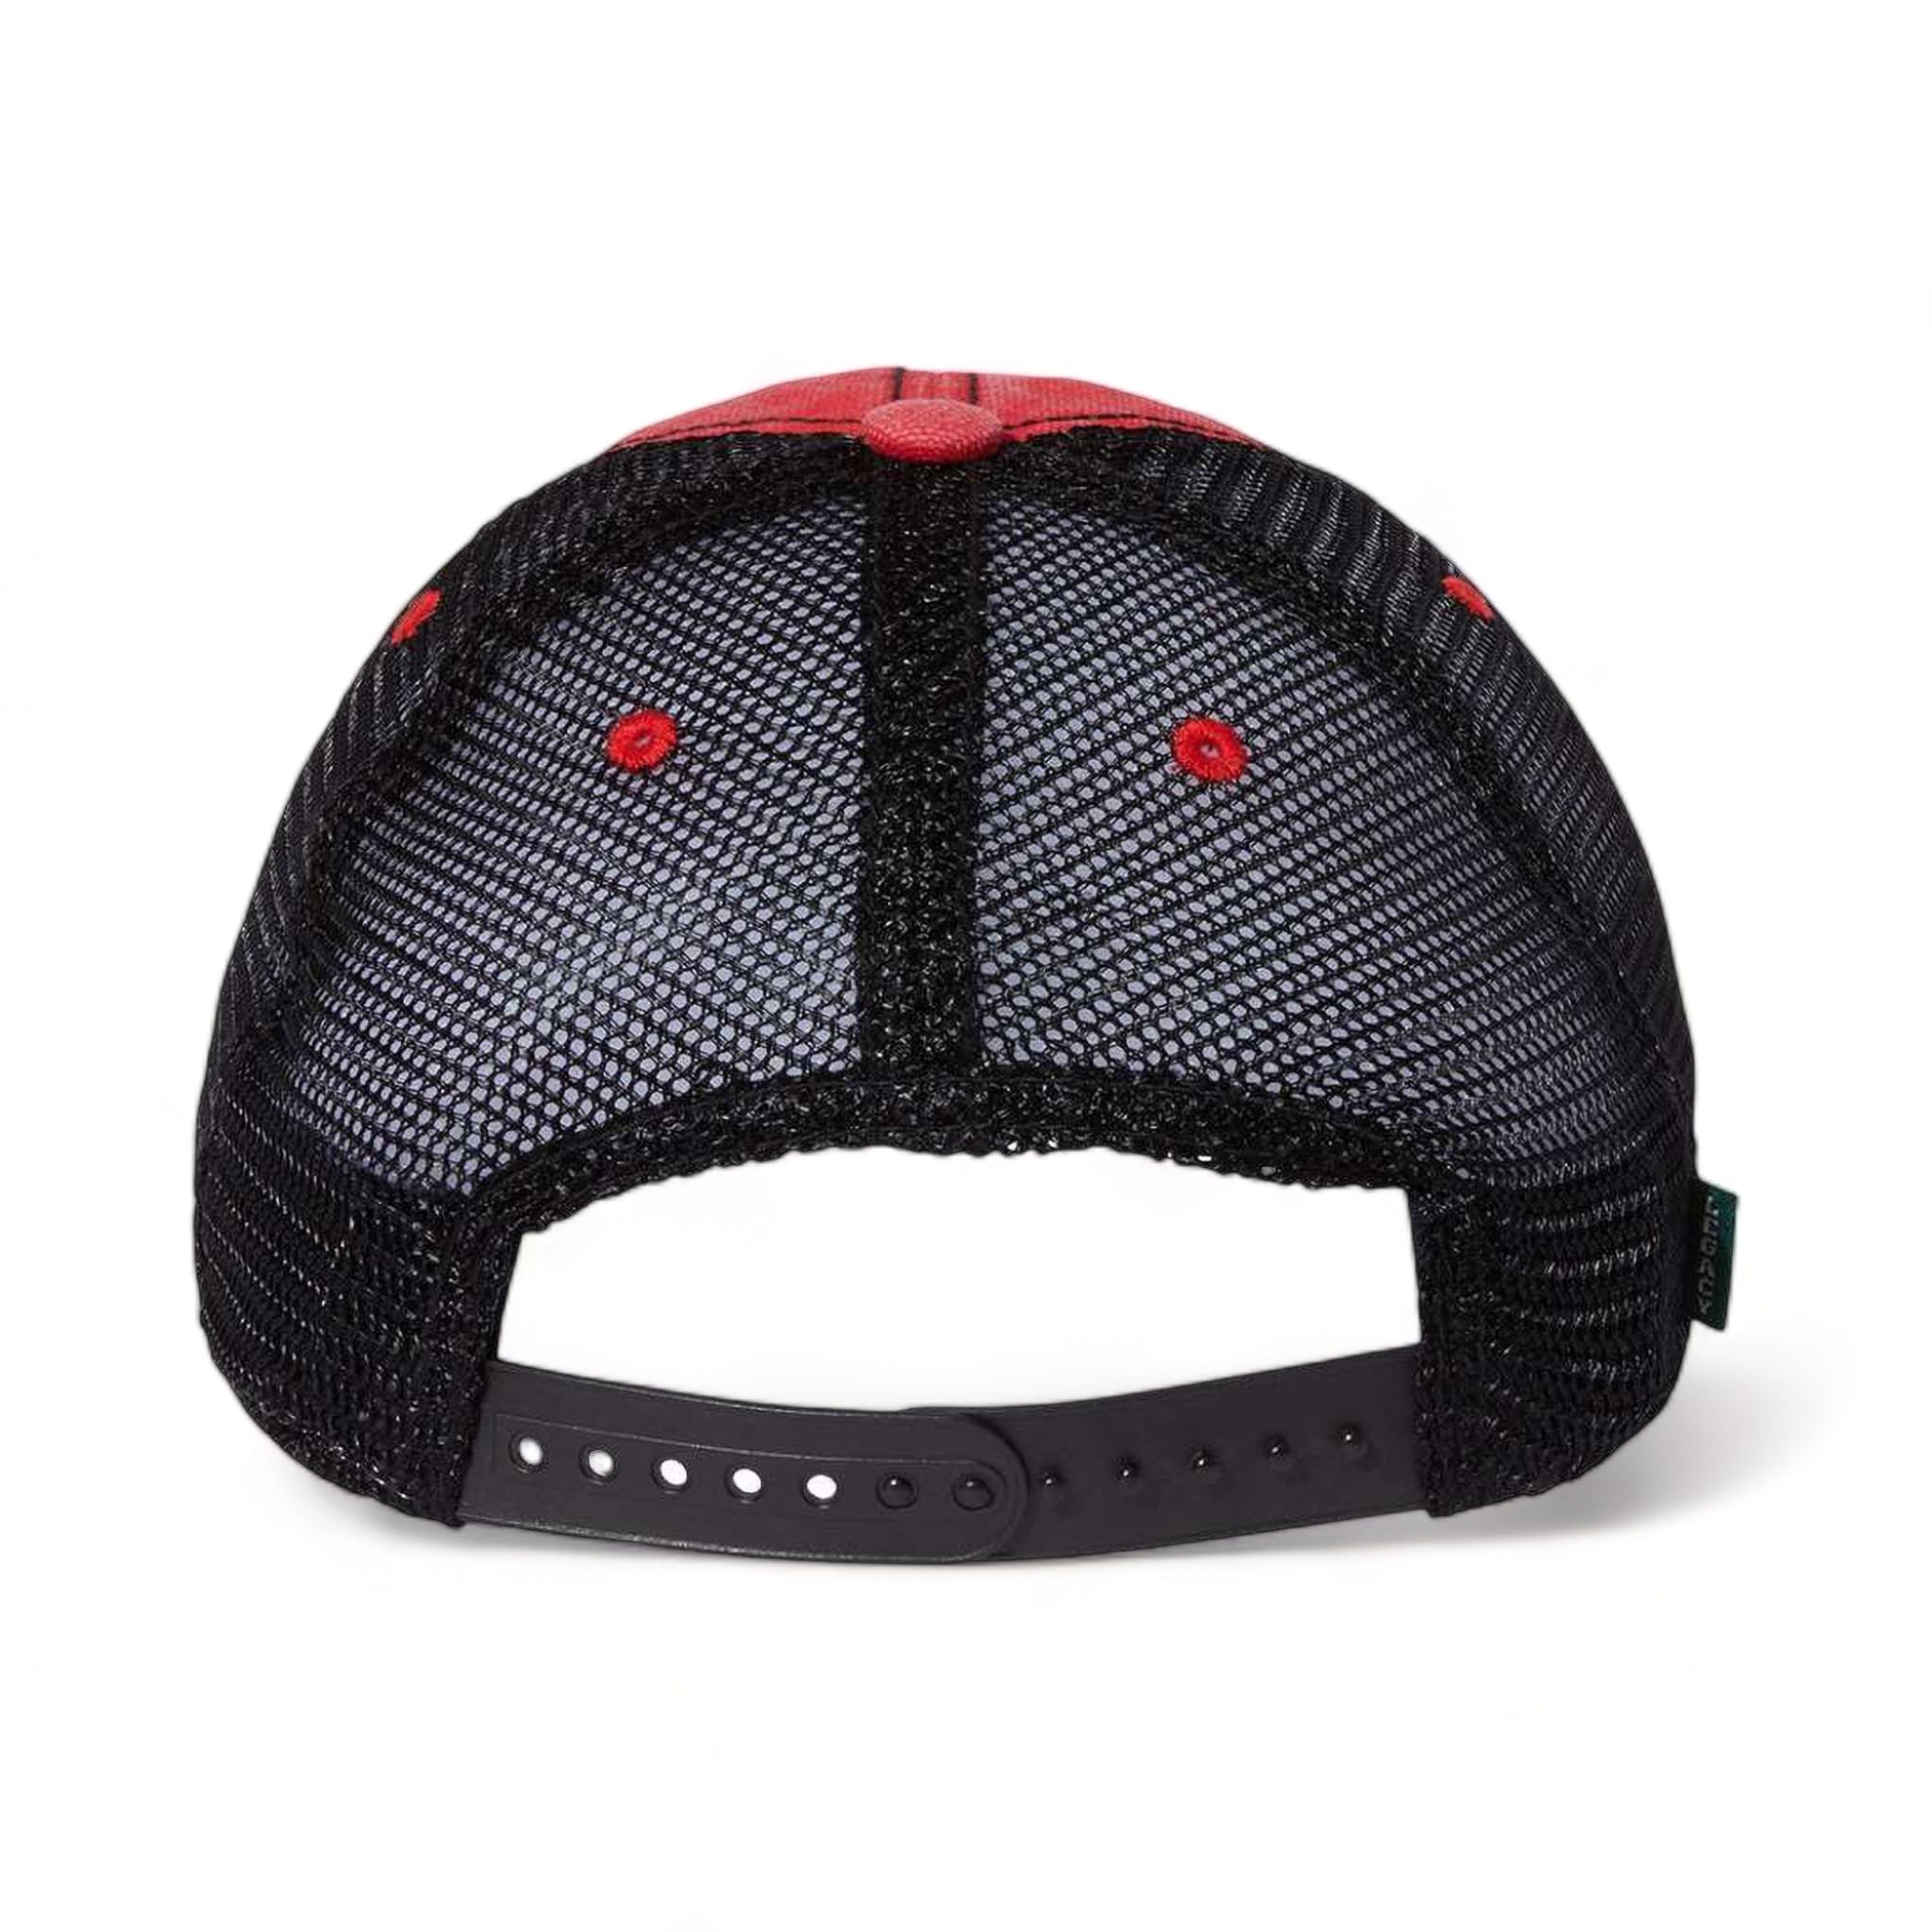 Back view of LEGACY DTA custom hat in scarlet red and black